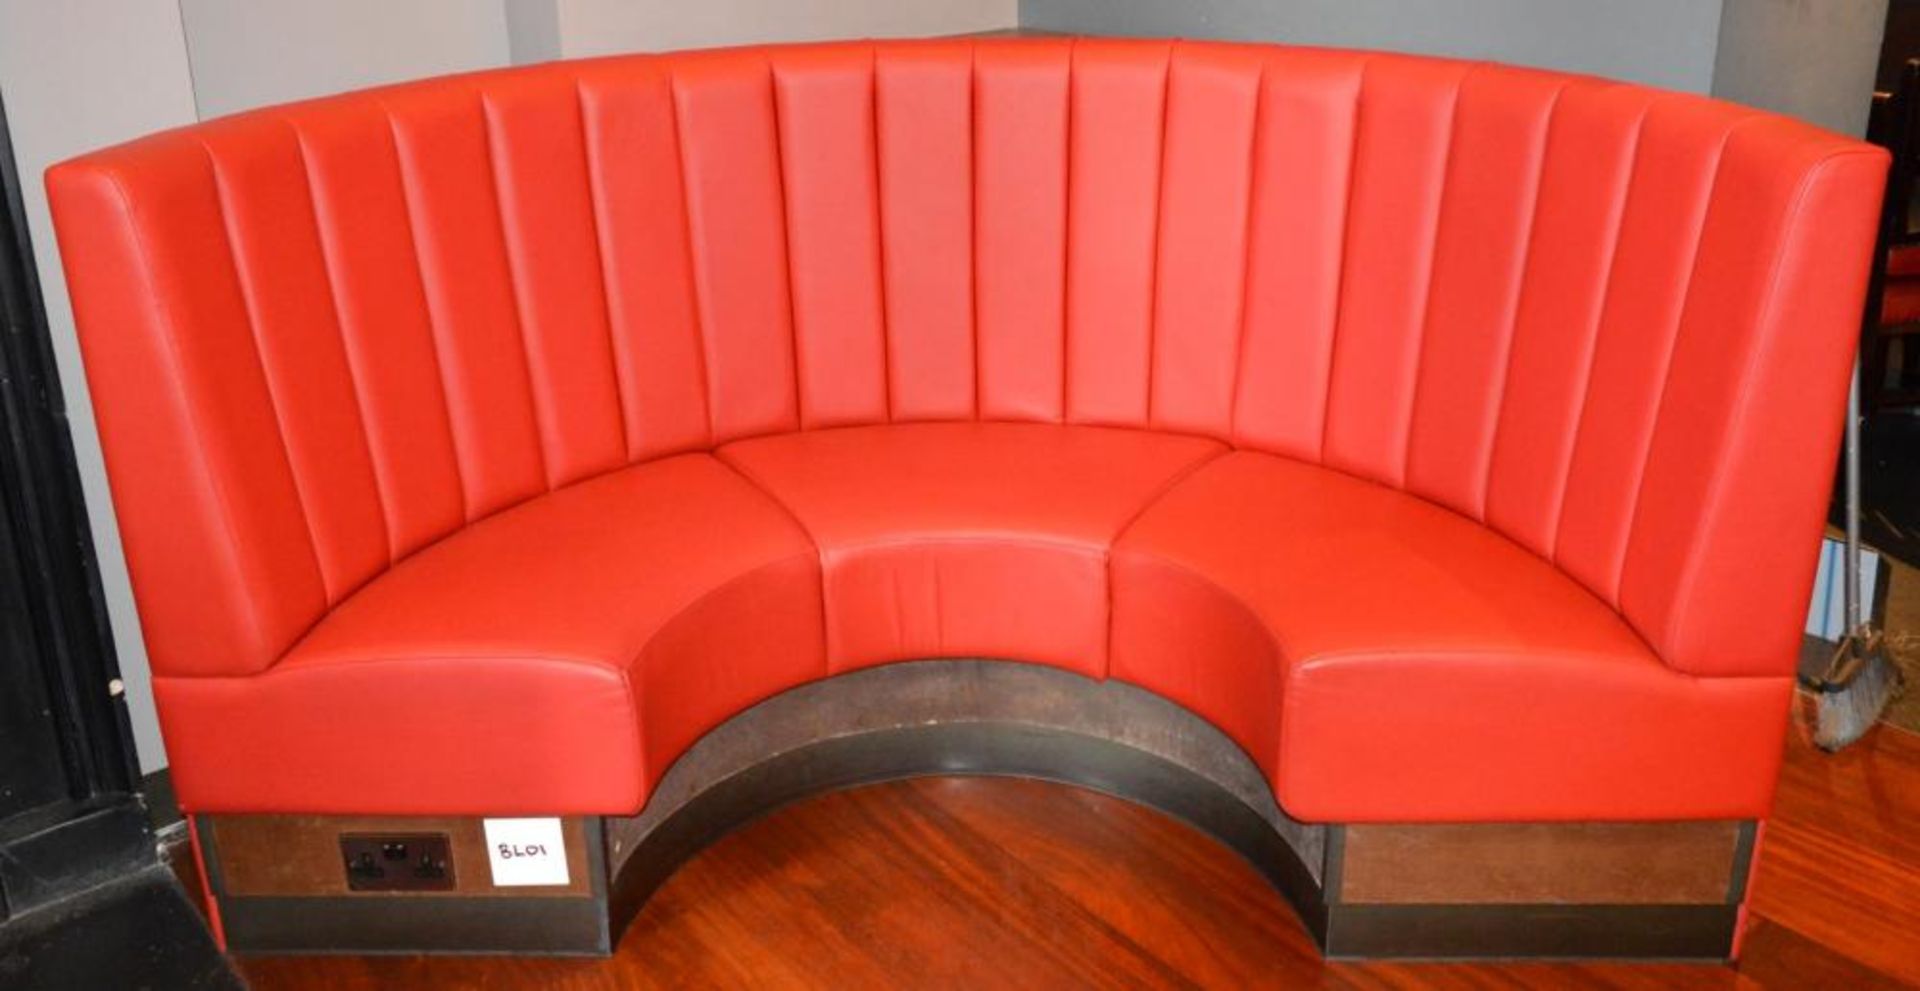 1 x Curved C-Shaped Seating Booth Upholstered In A Bright Red Leather - CL353 - Image 2 of 11